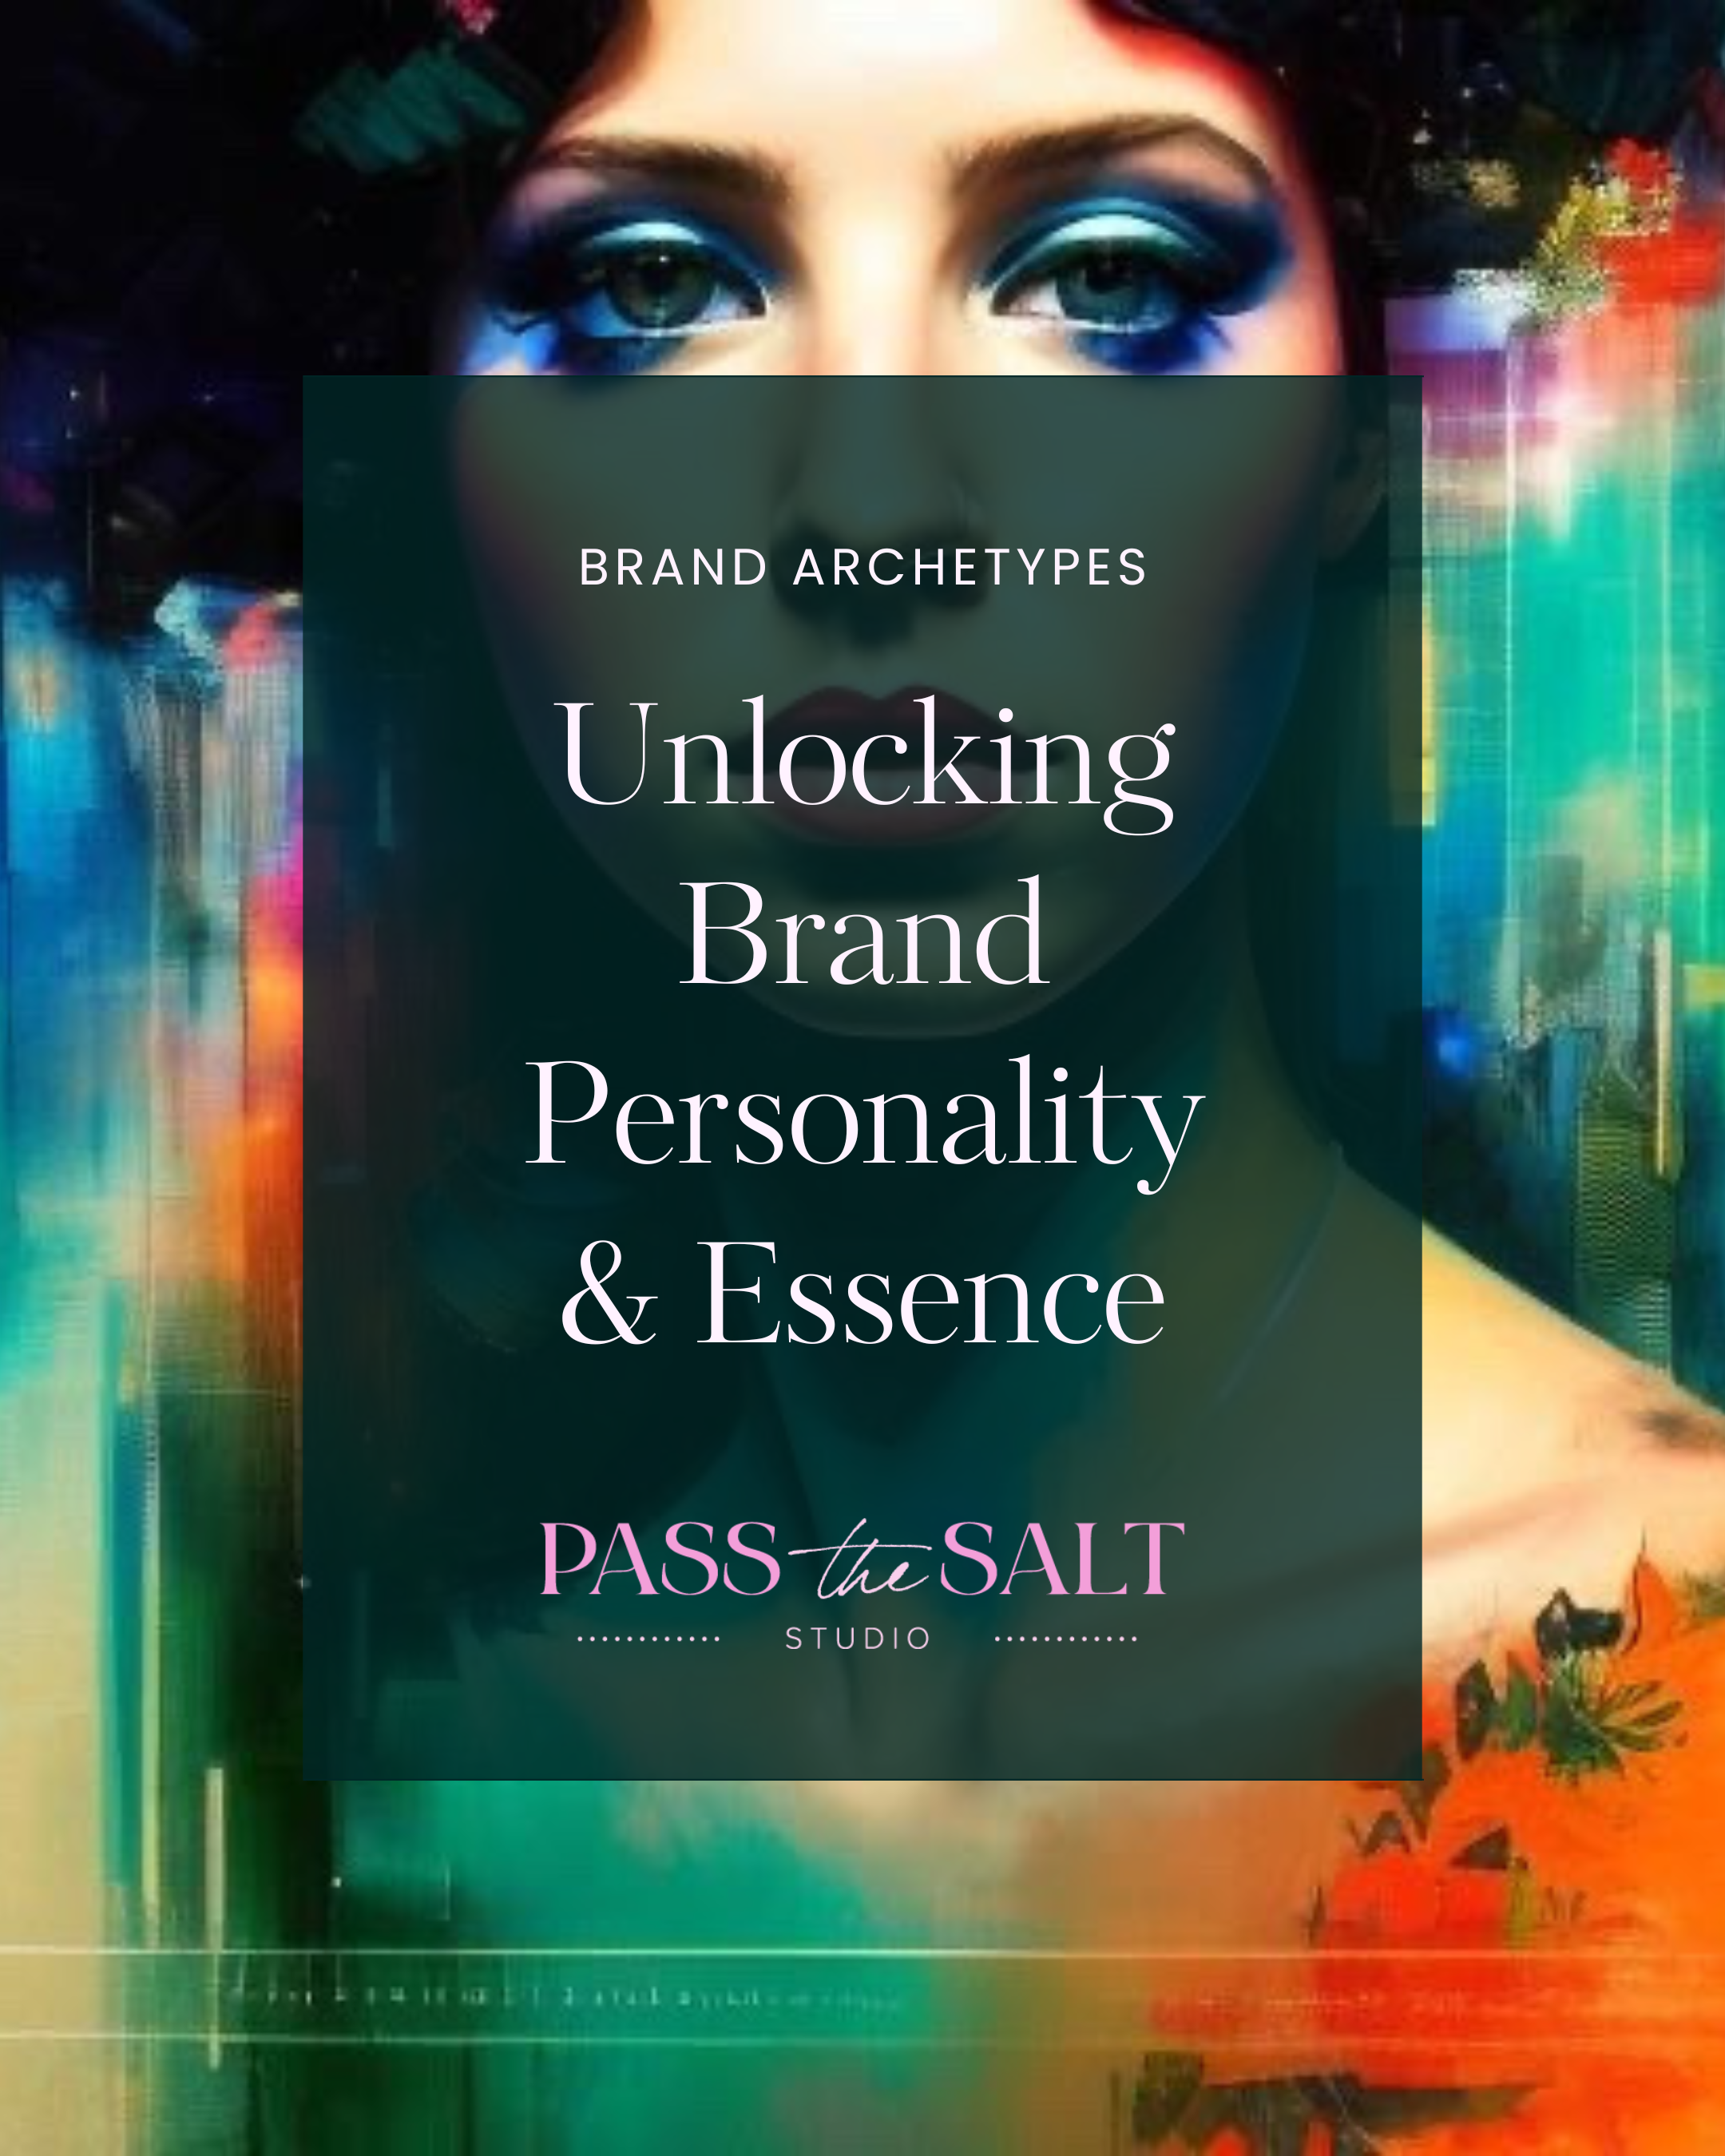 Unlocking personality and essence with brand archetypes